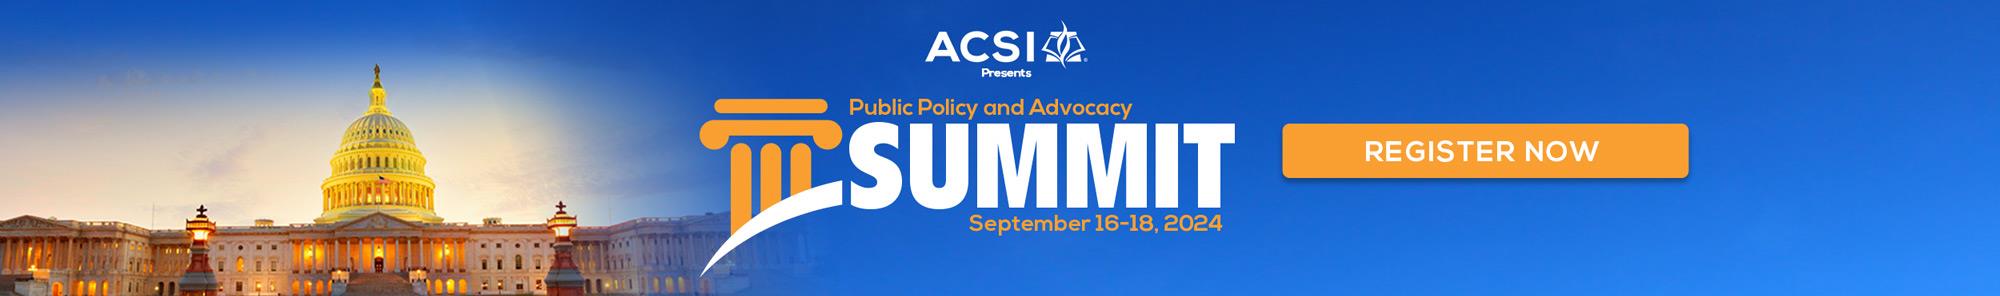 Public Policy and Legal Affairs Summit